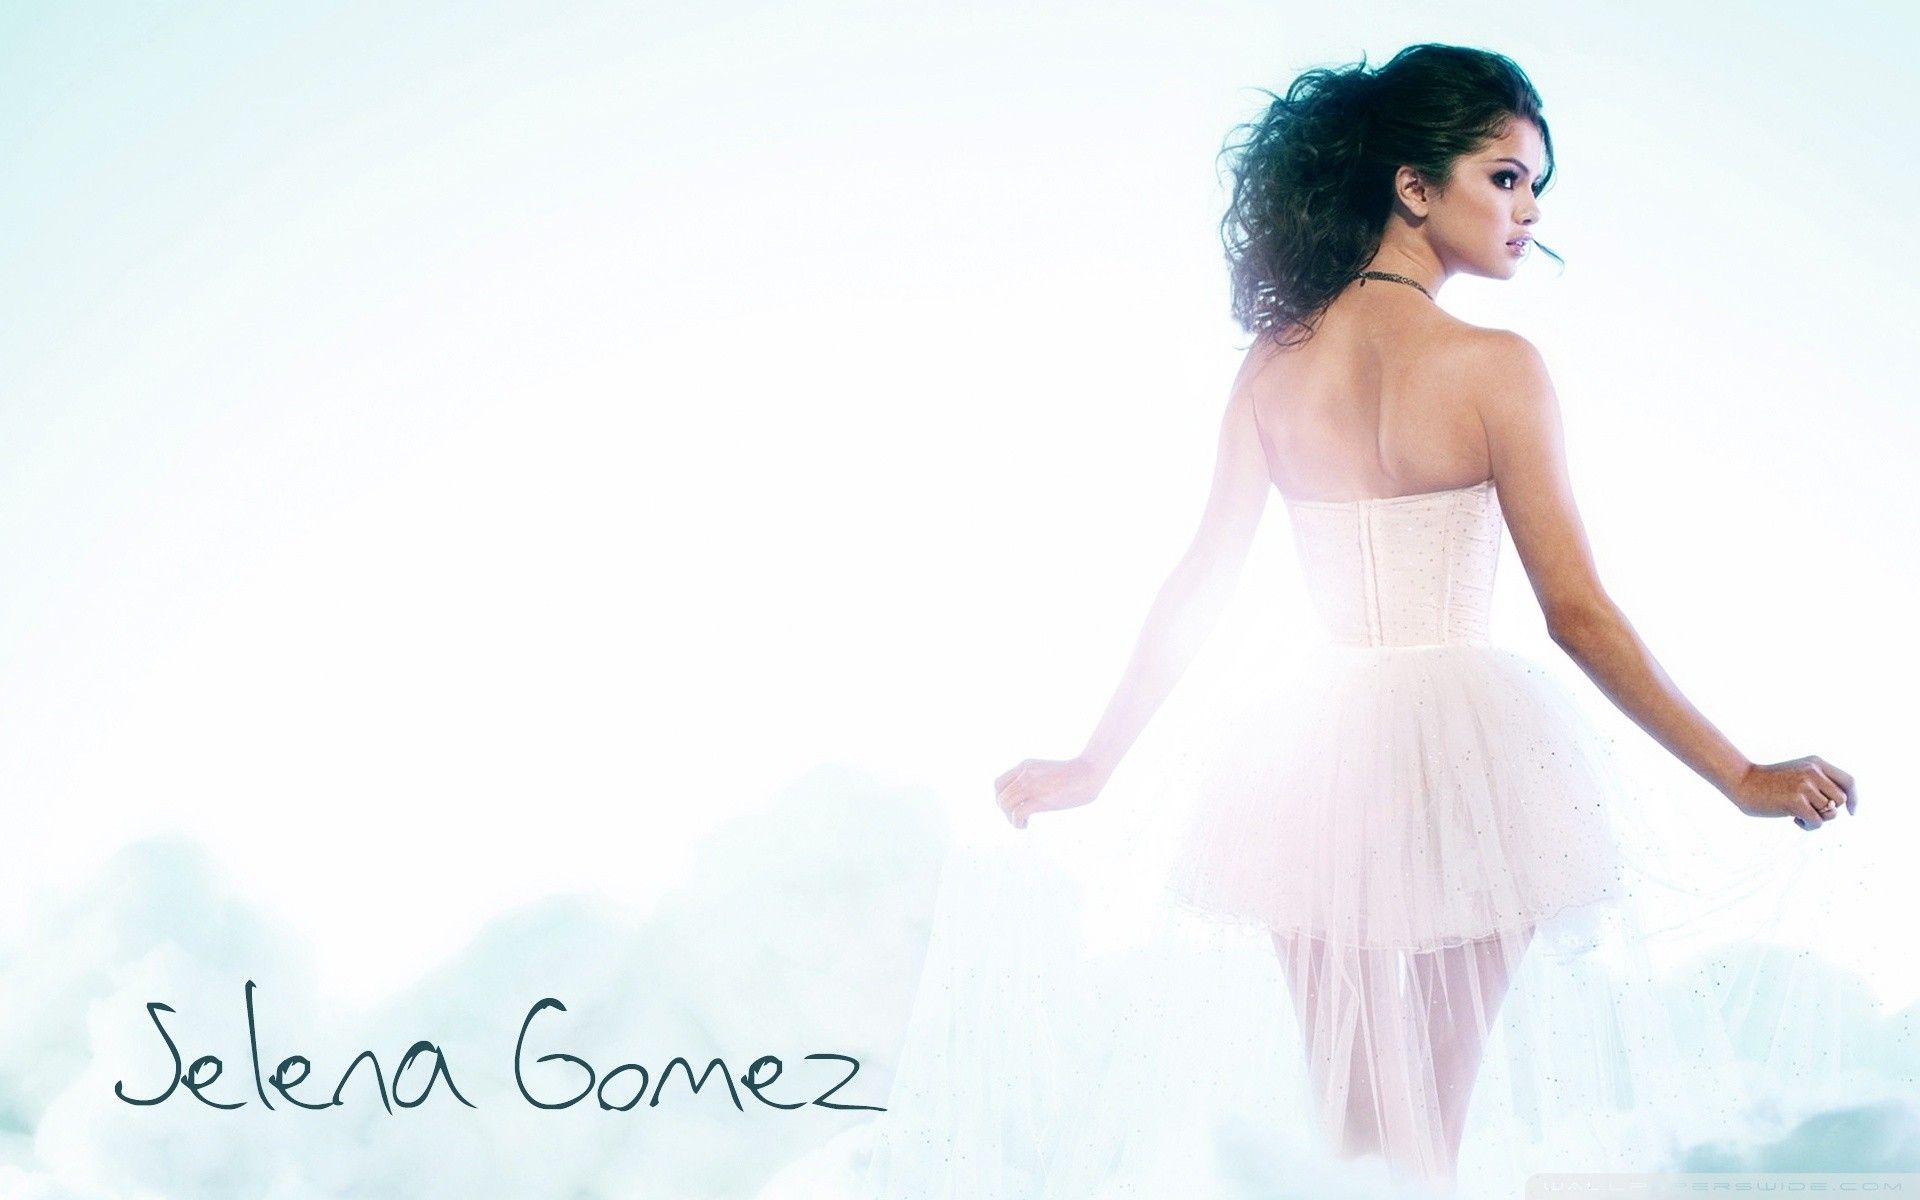 Selena Gomez on a white background wallpapers and images ...